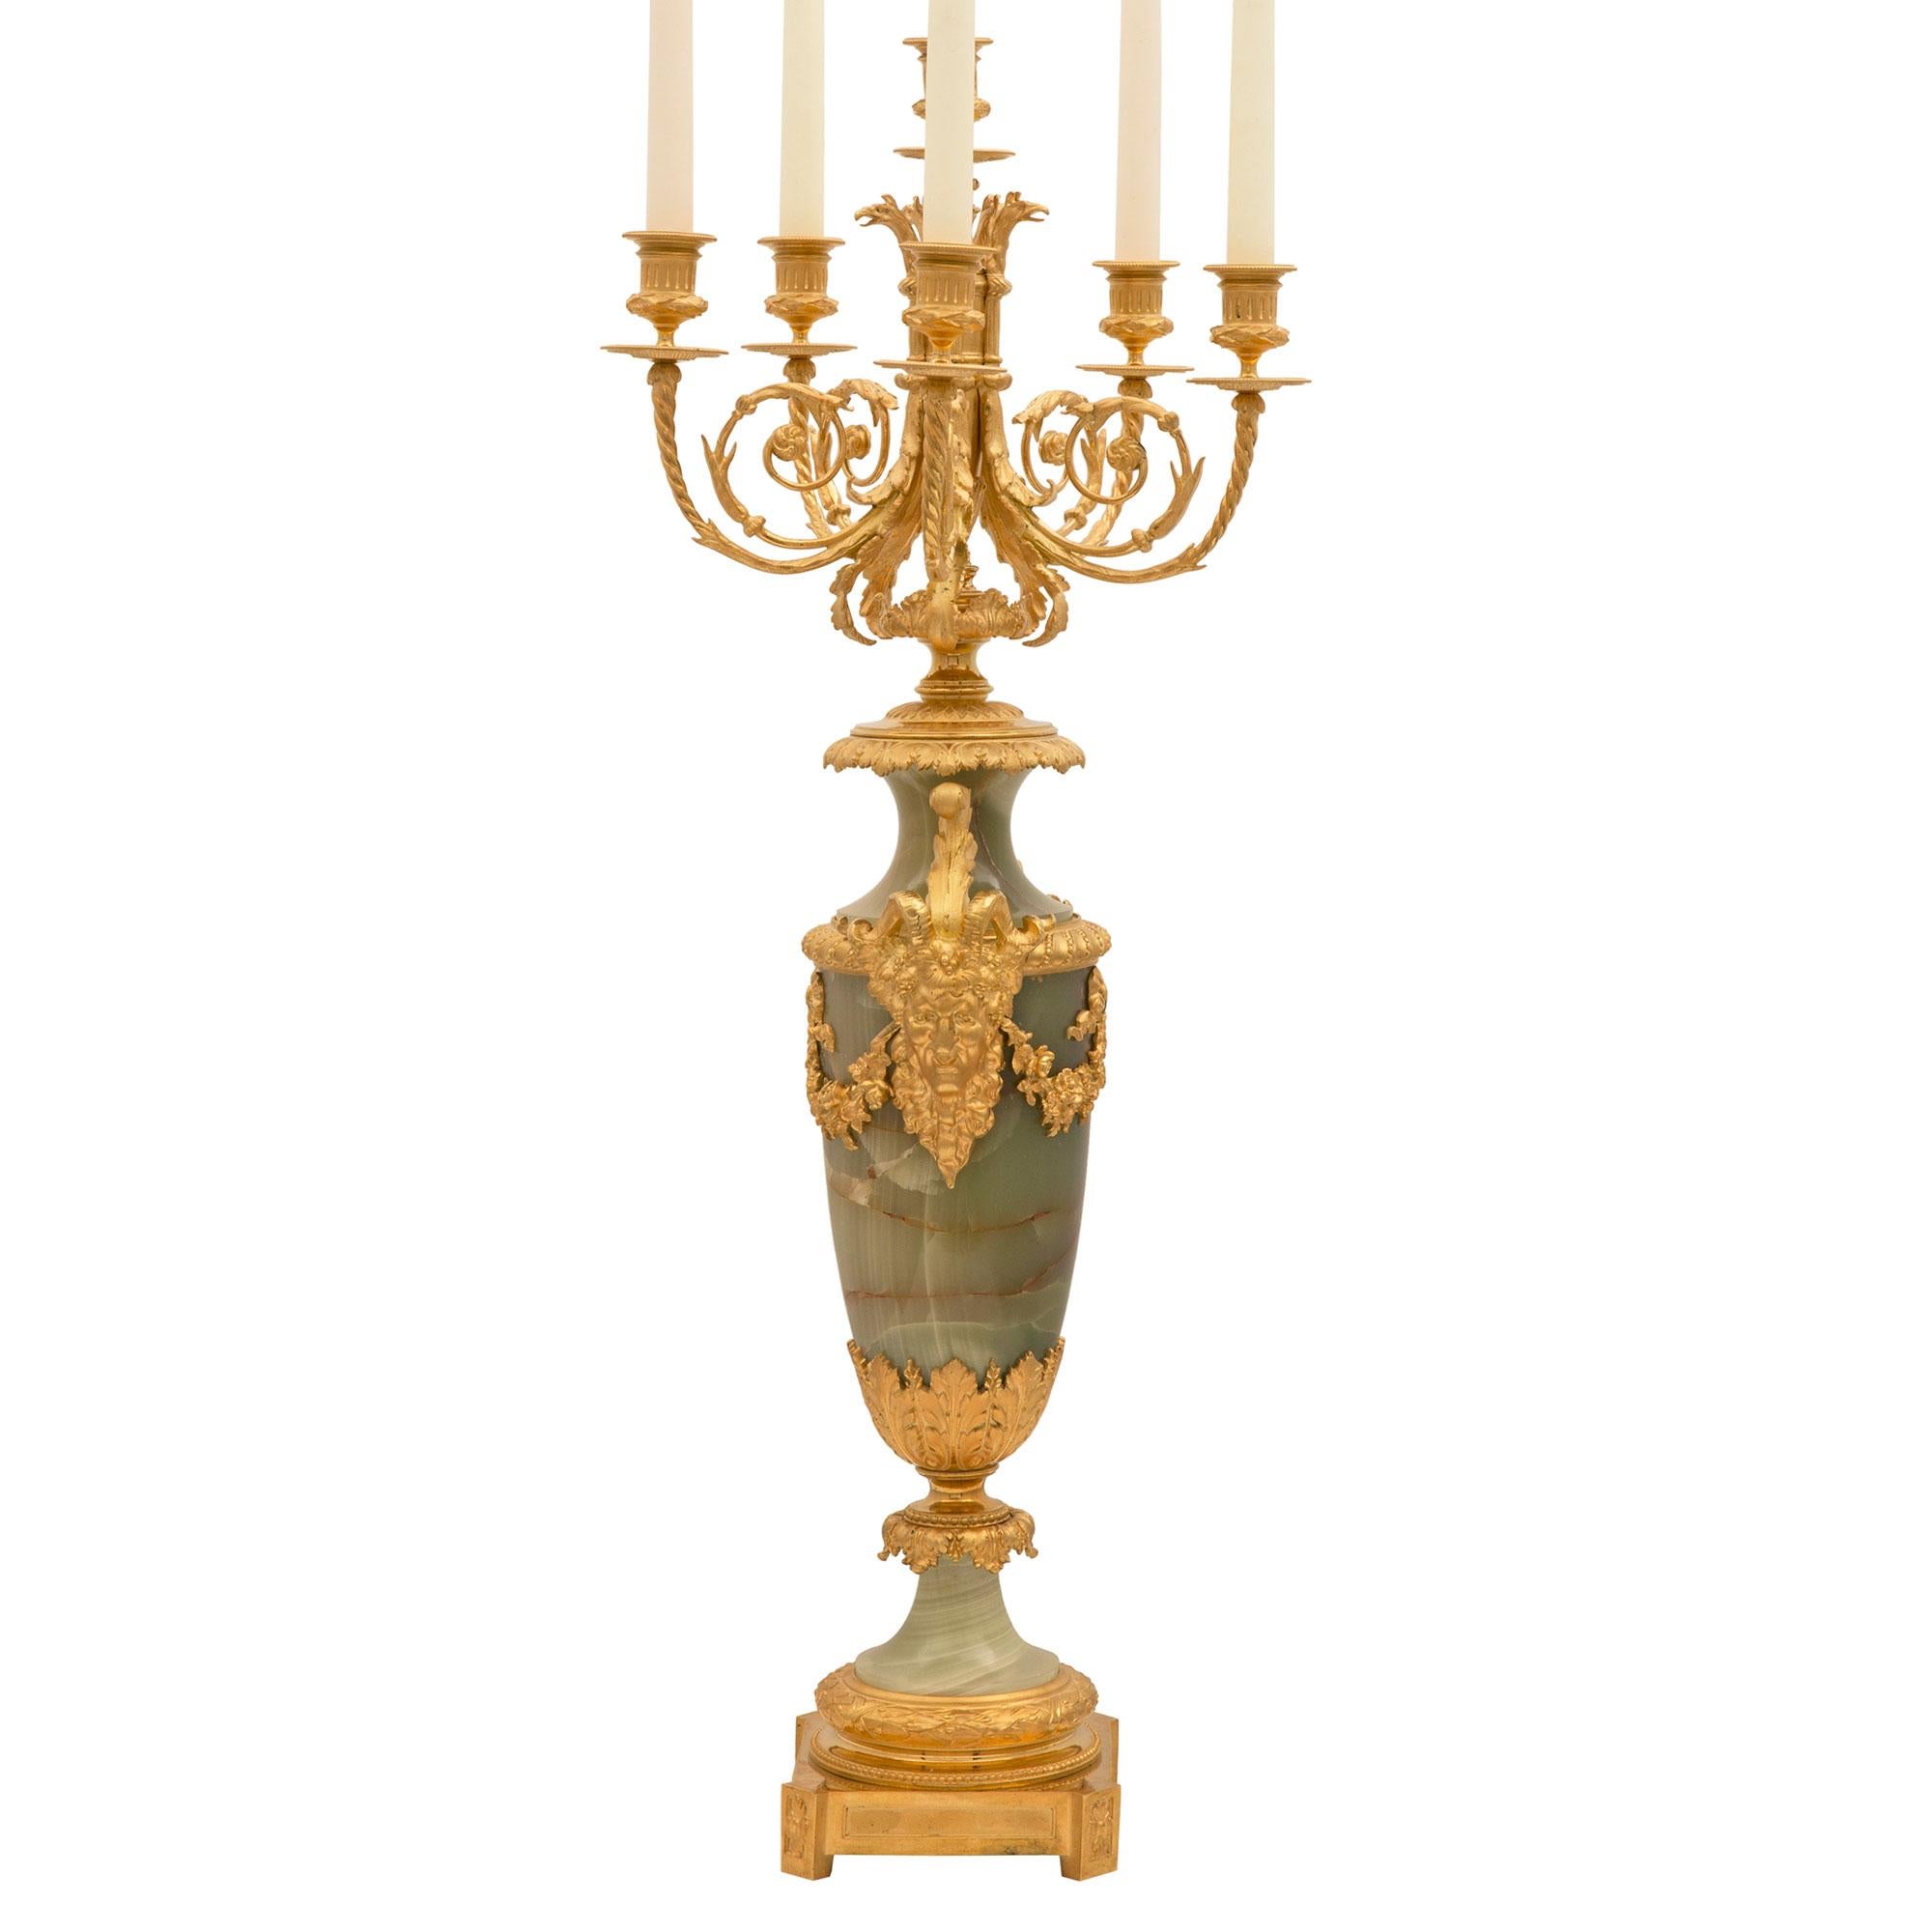 Belle Époque Pair of French 19th Century Louis XVI Style Green Onyx and Ormolu Candelabras For Sale